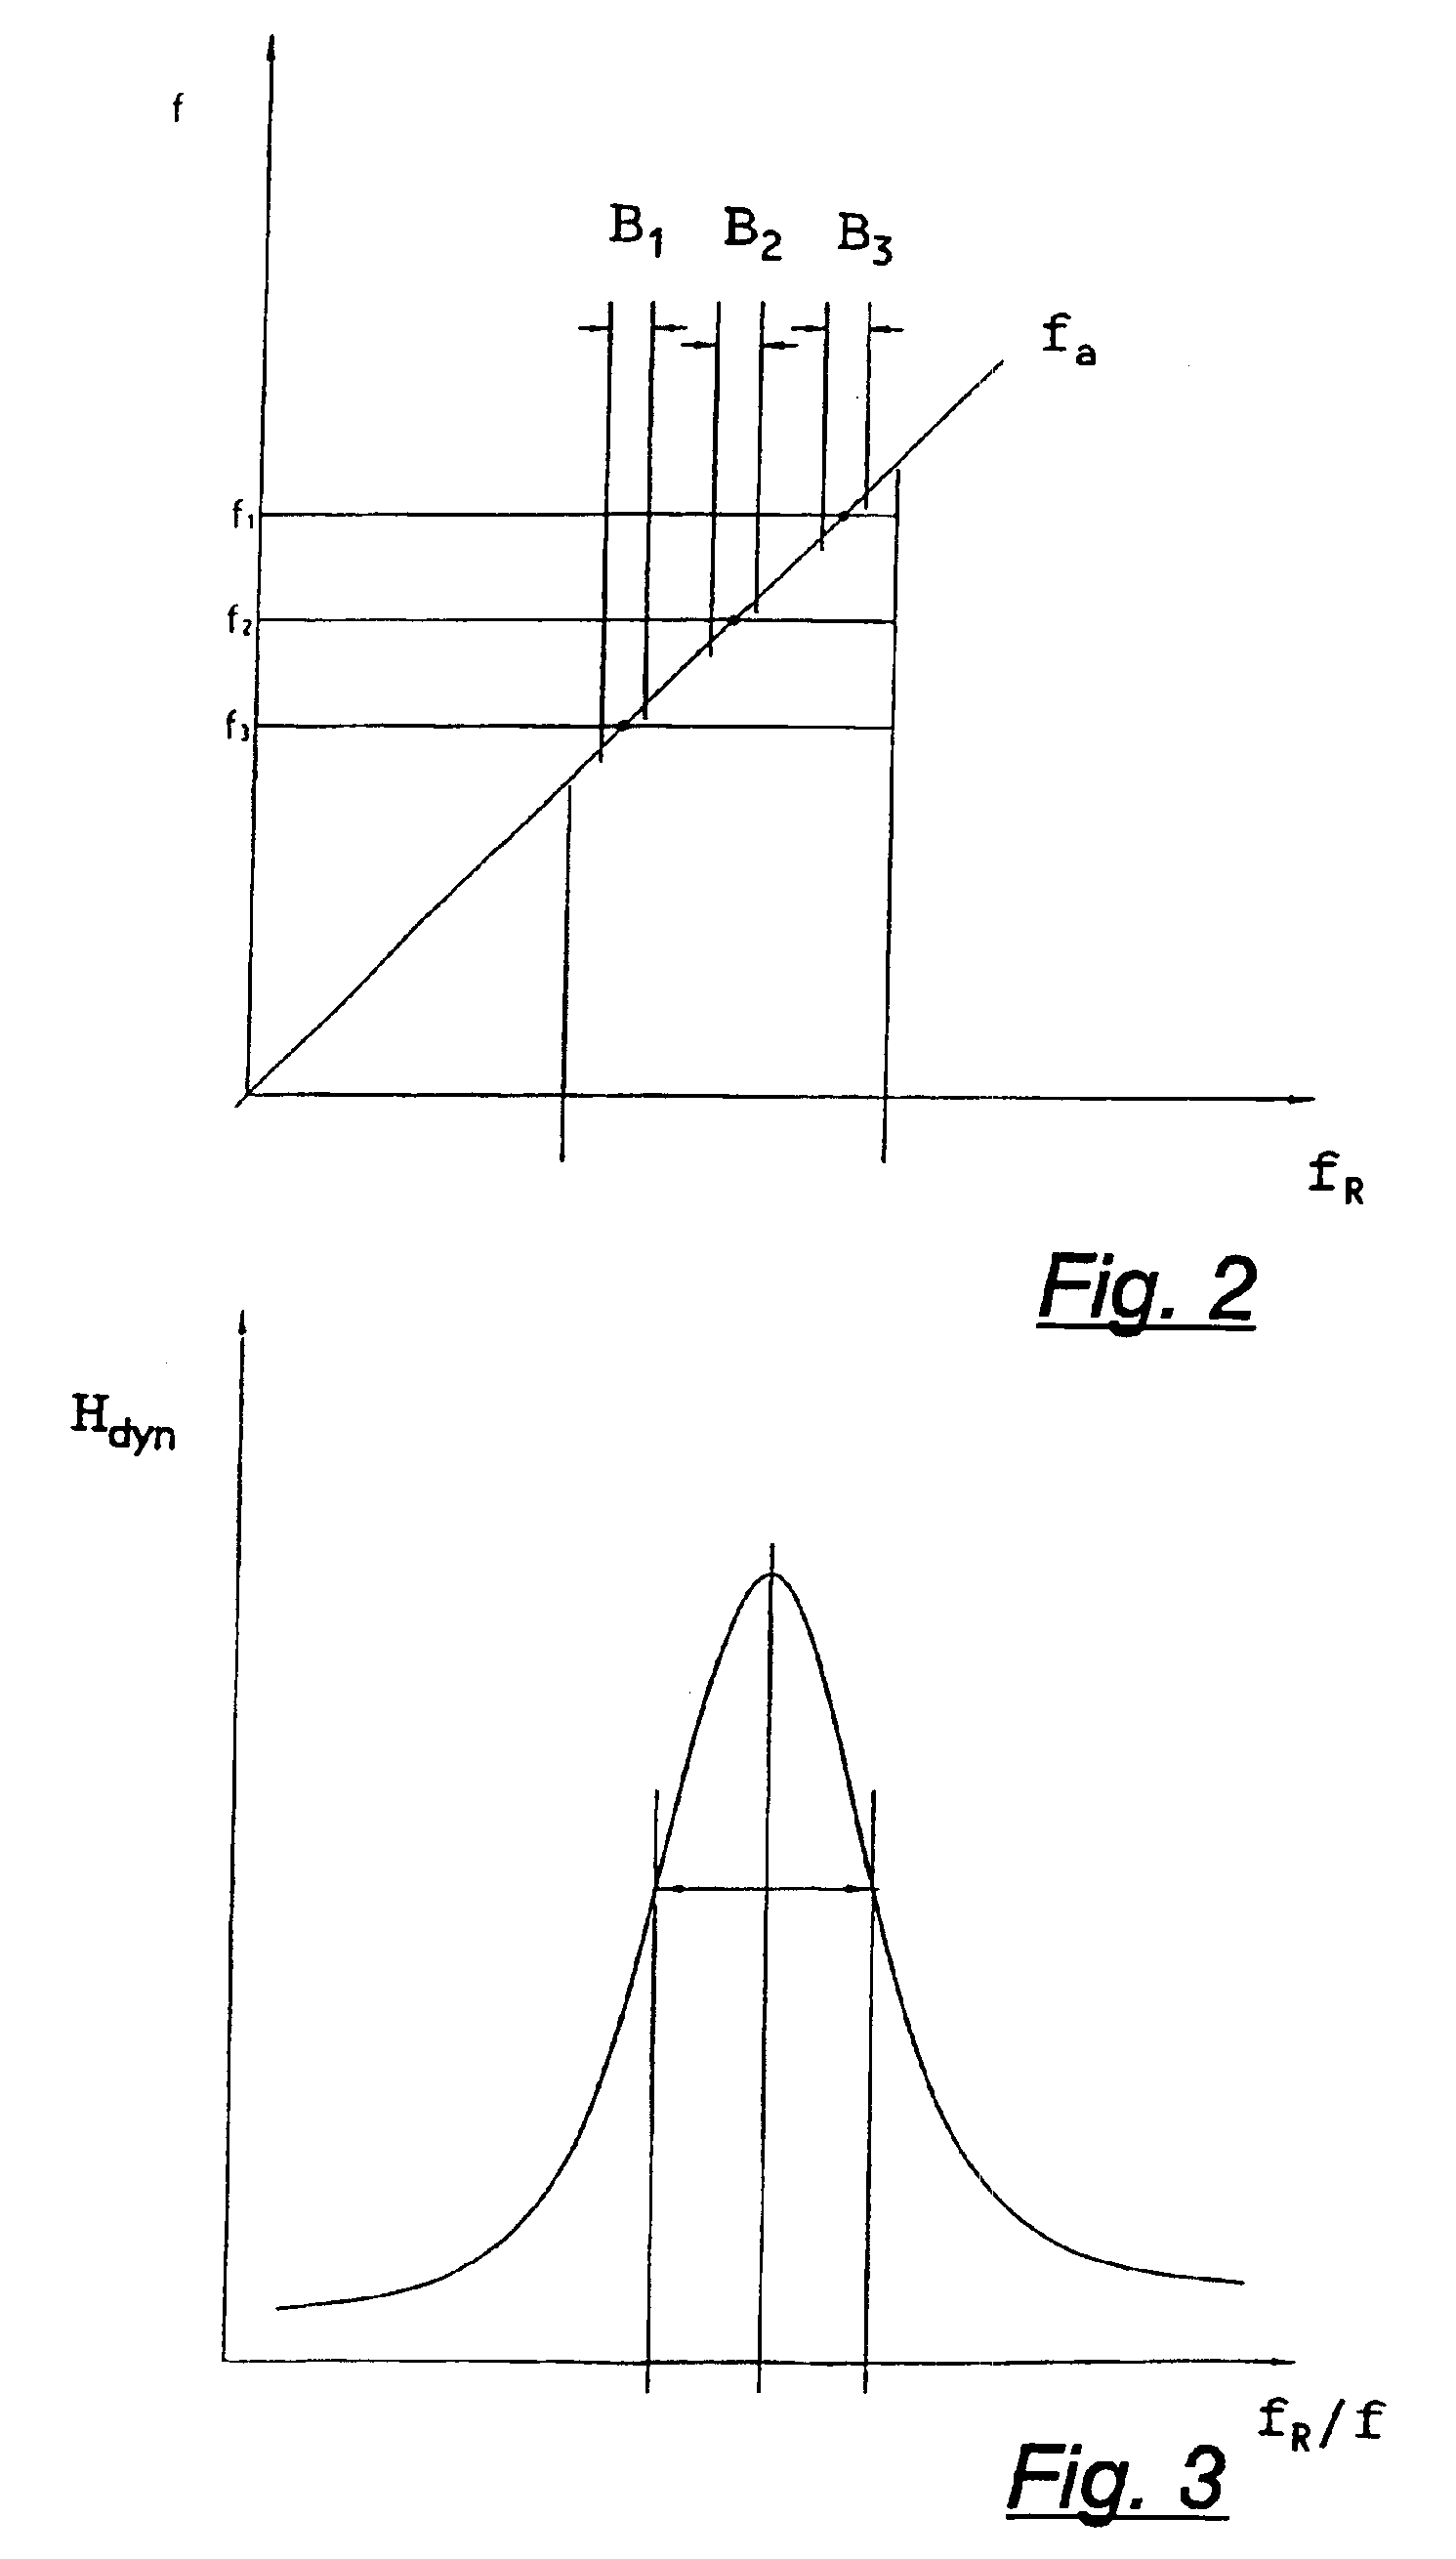 Method for operating offshore wind turbine plants based on the frequency of their towers